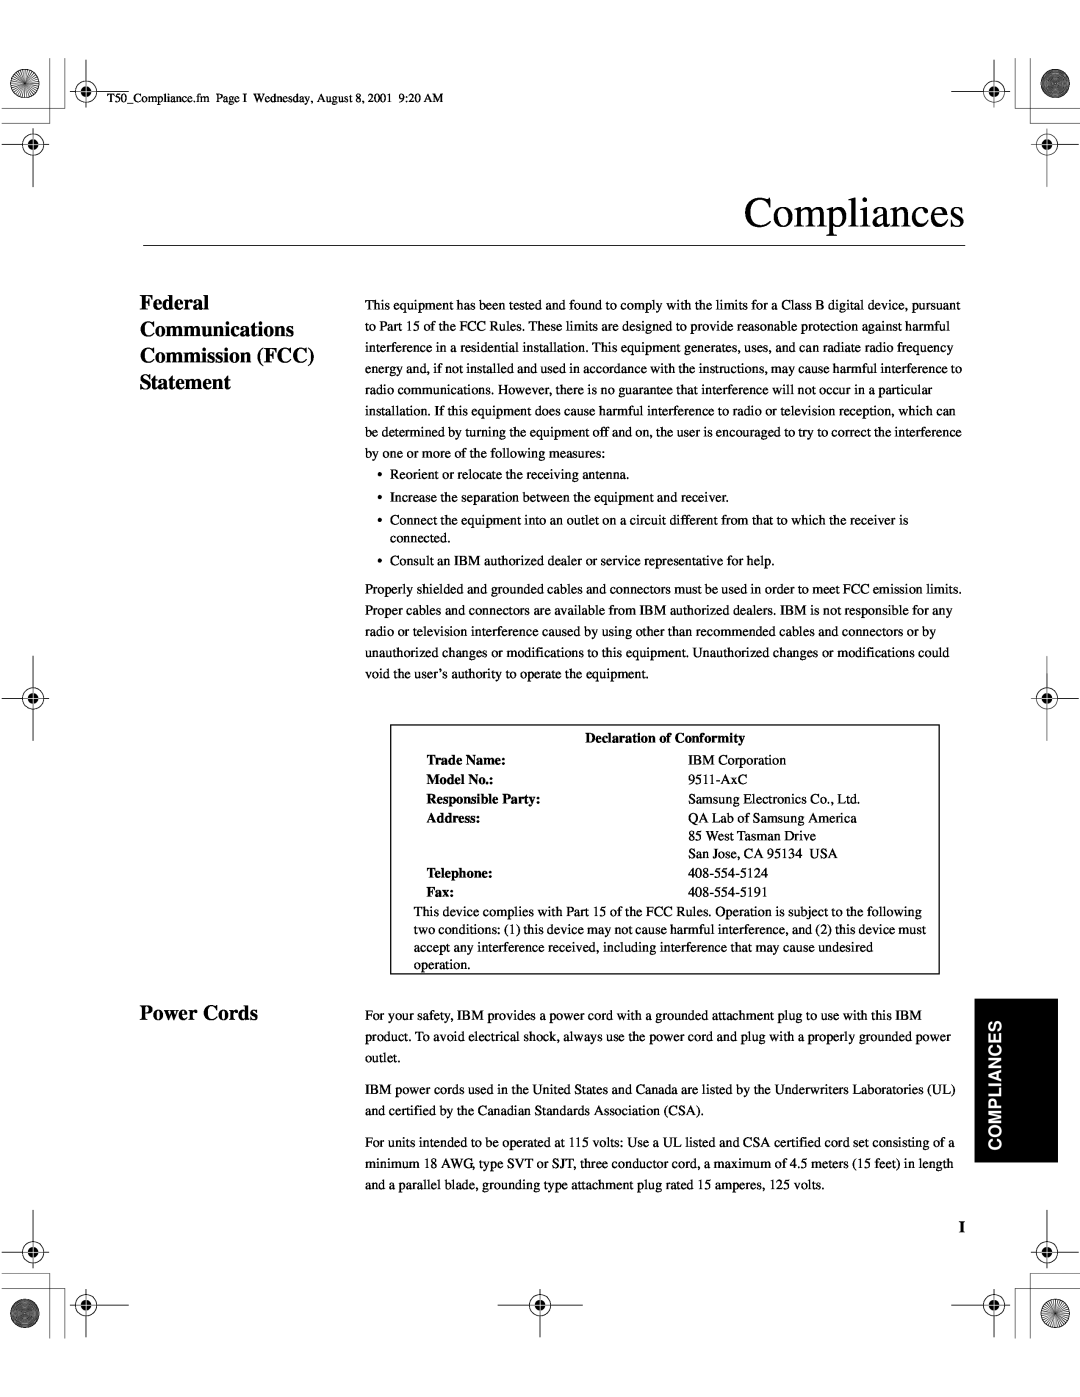 IBM 9511-AGC, T50 manual Compliances, Declaration of Conformity, Trade Name, Model No, Responsible Party, Address, Telephone 